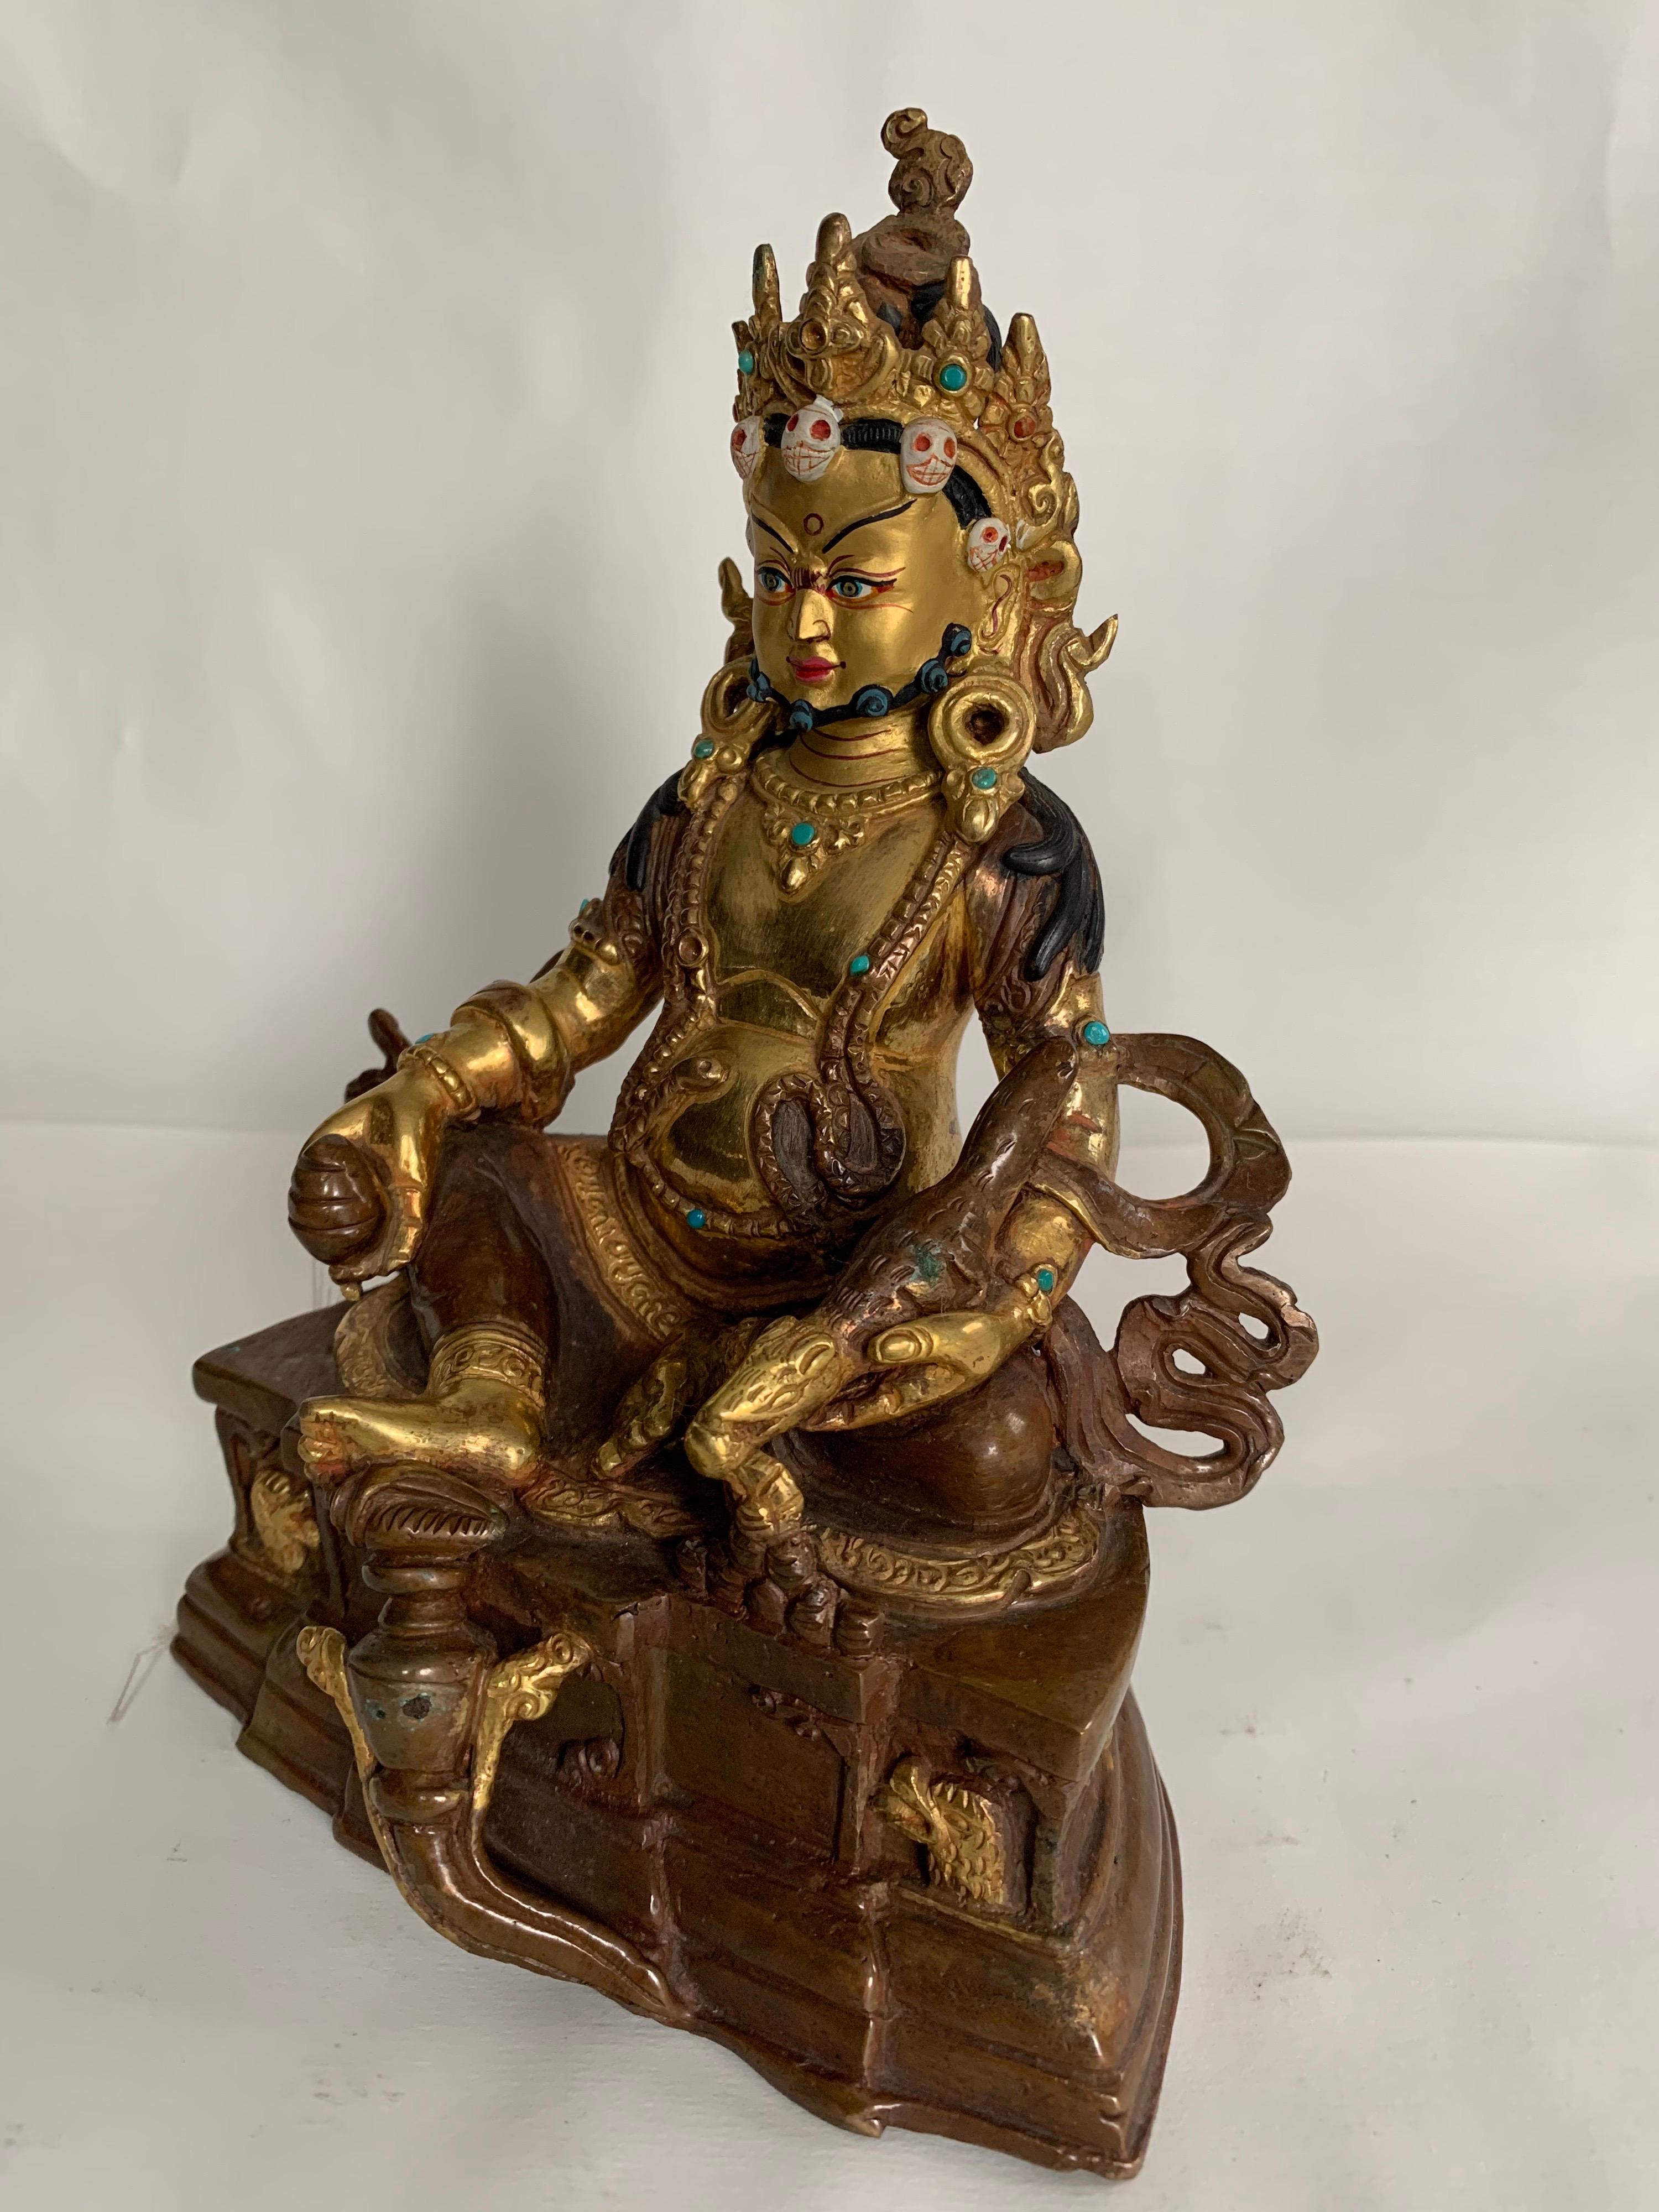 Kubera Statue 6 Inch with 24K Gold Handcrafted by Lost Wax Process - Sculpture by Unknown